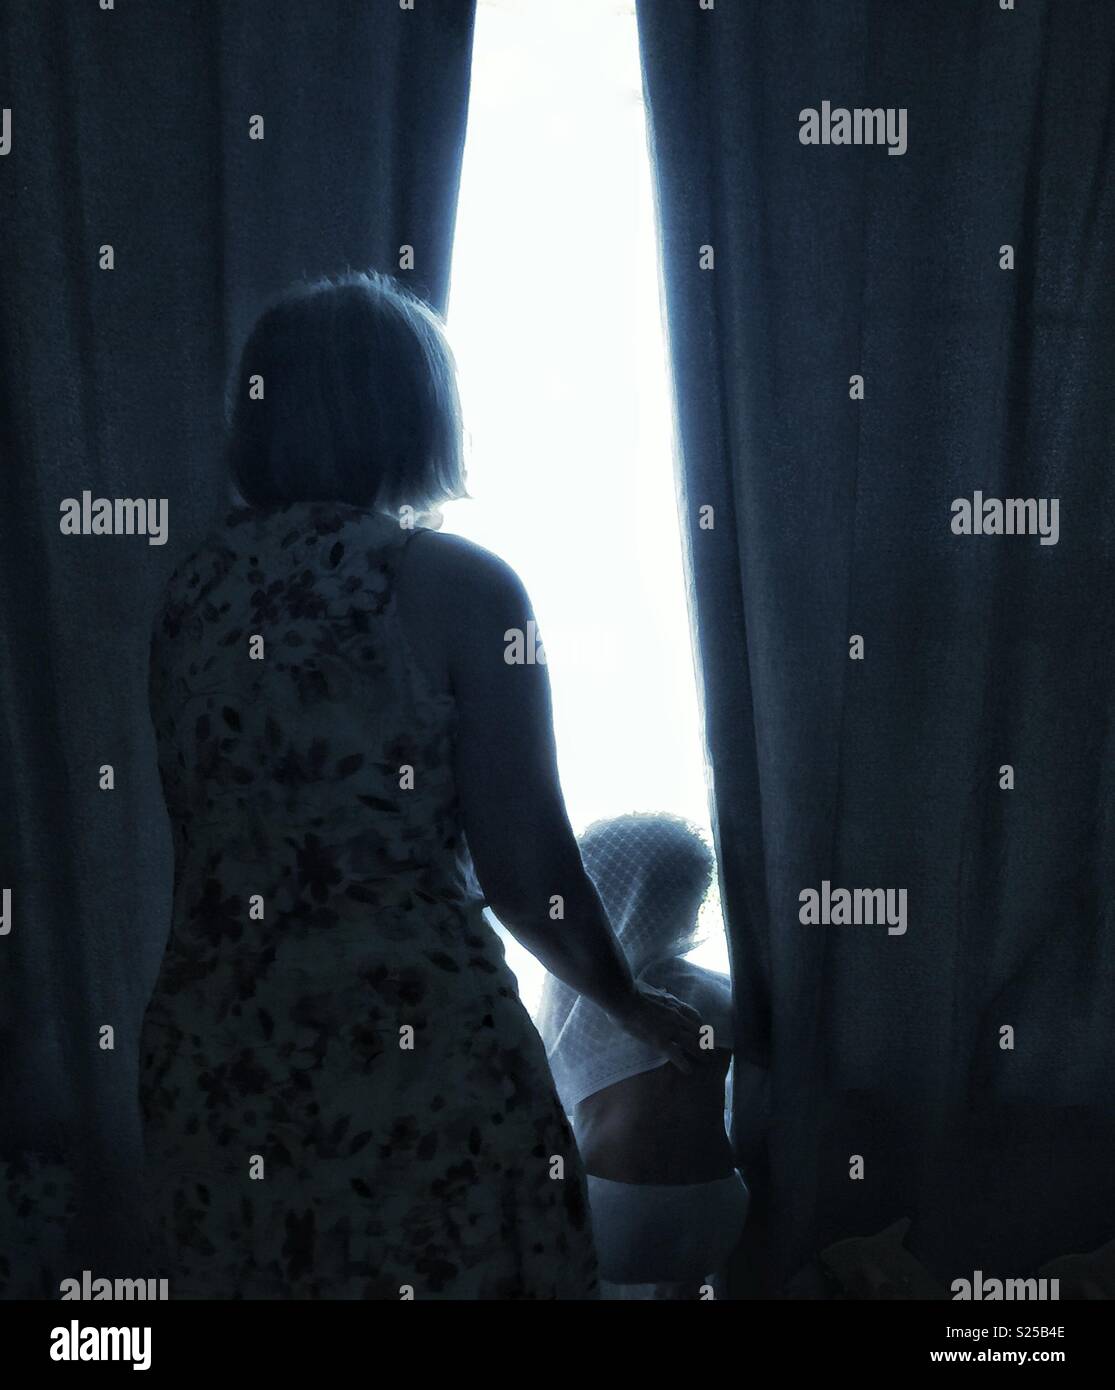 Family looking through a window in silhouette. Stock Photo